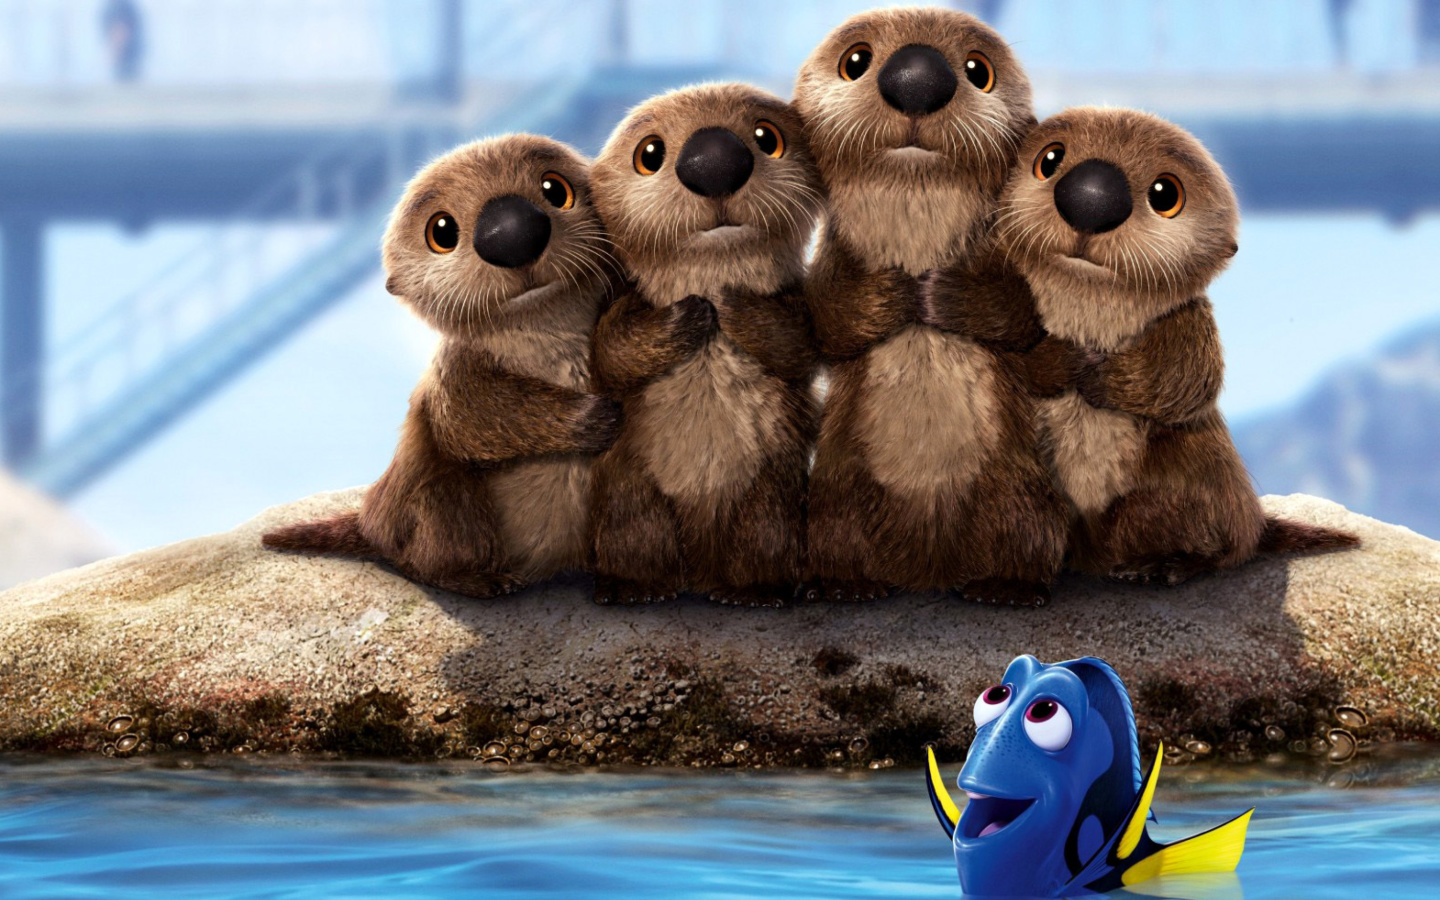 Das Finding Dory 3D Film with Beavers Wallpaper 1440x900